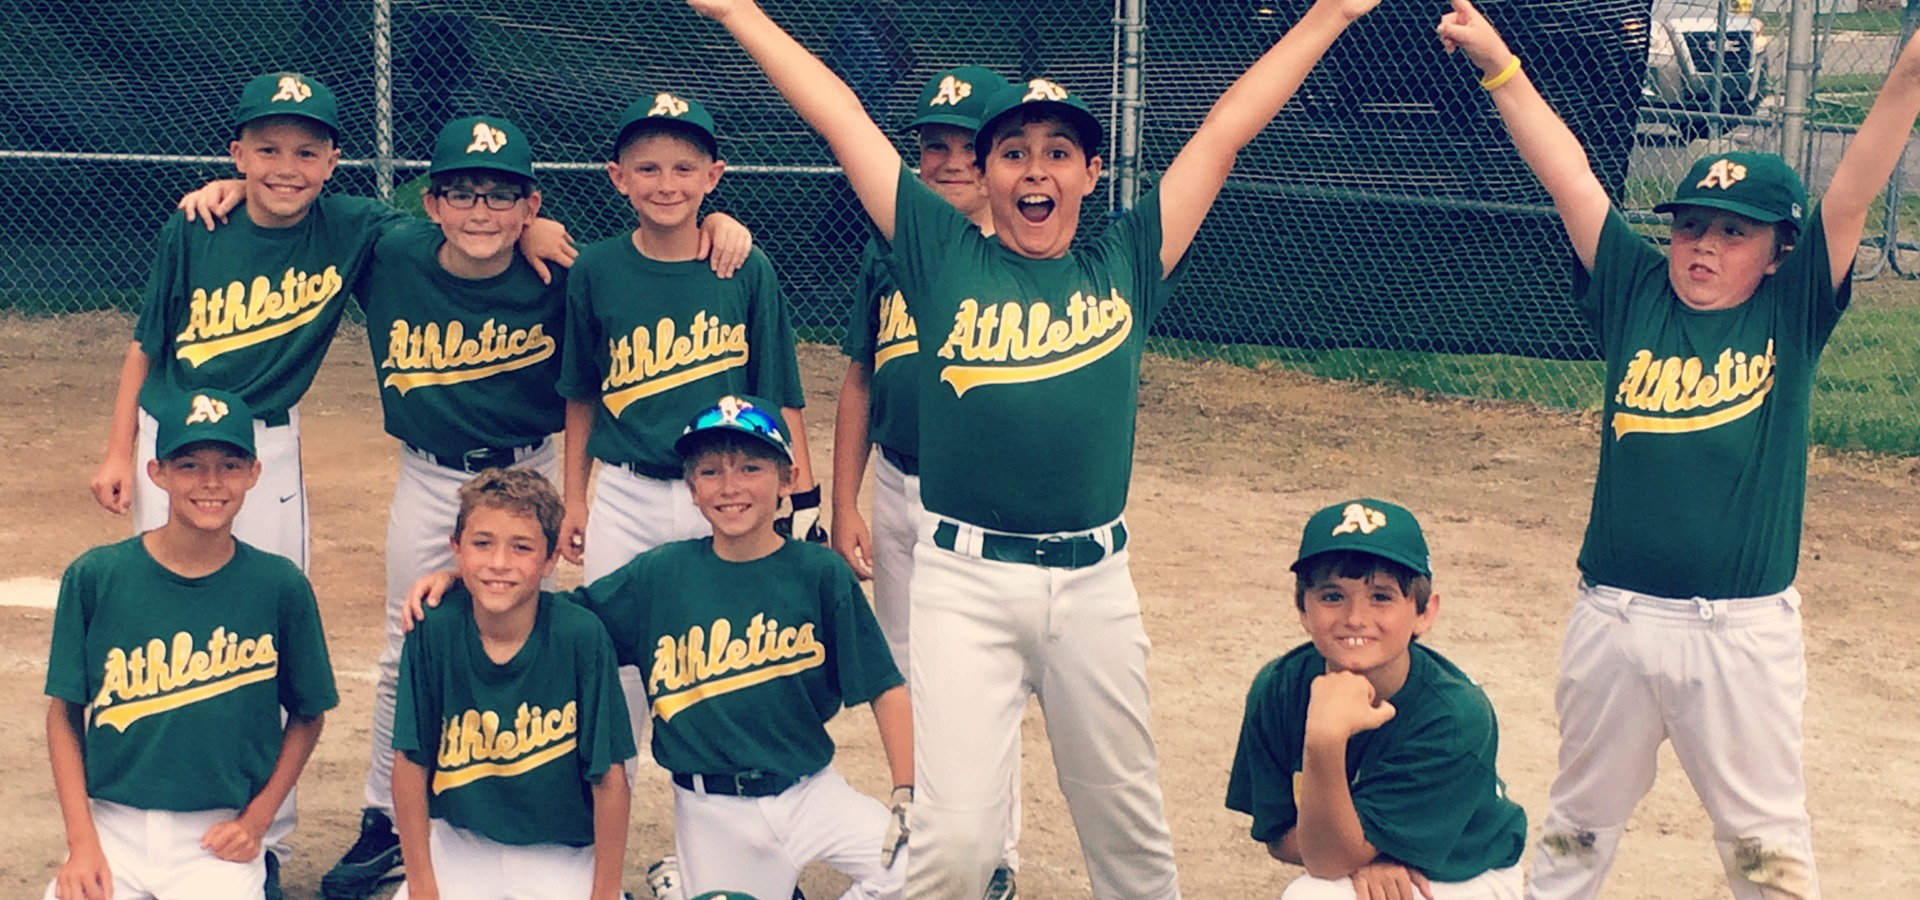 Roosevelt Park youth baseball players excited for the big win